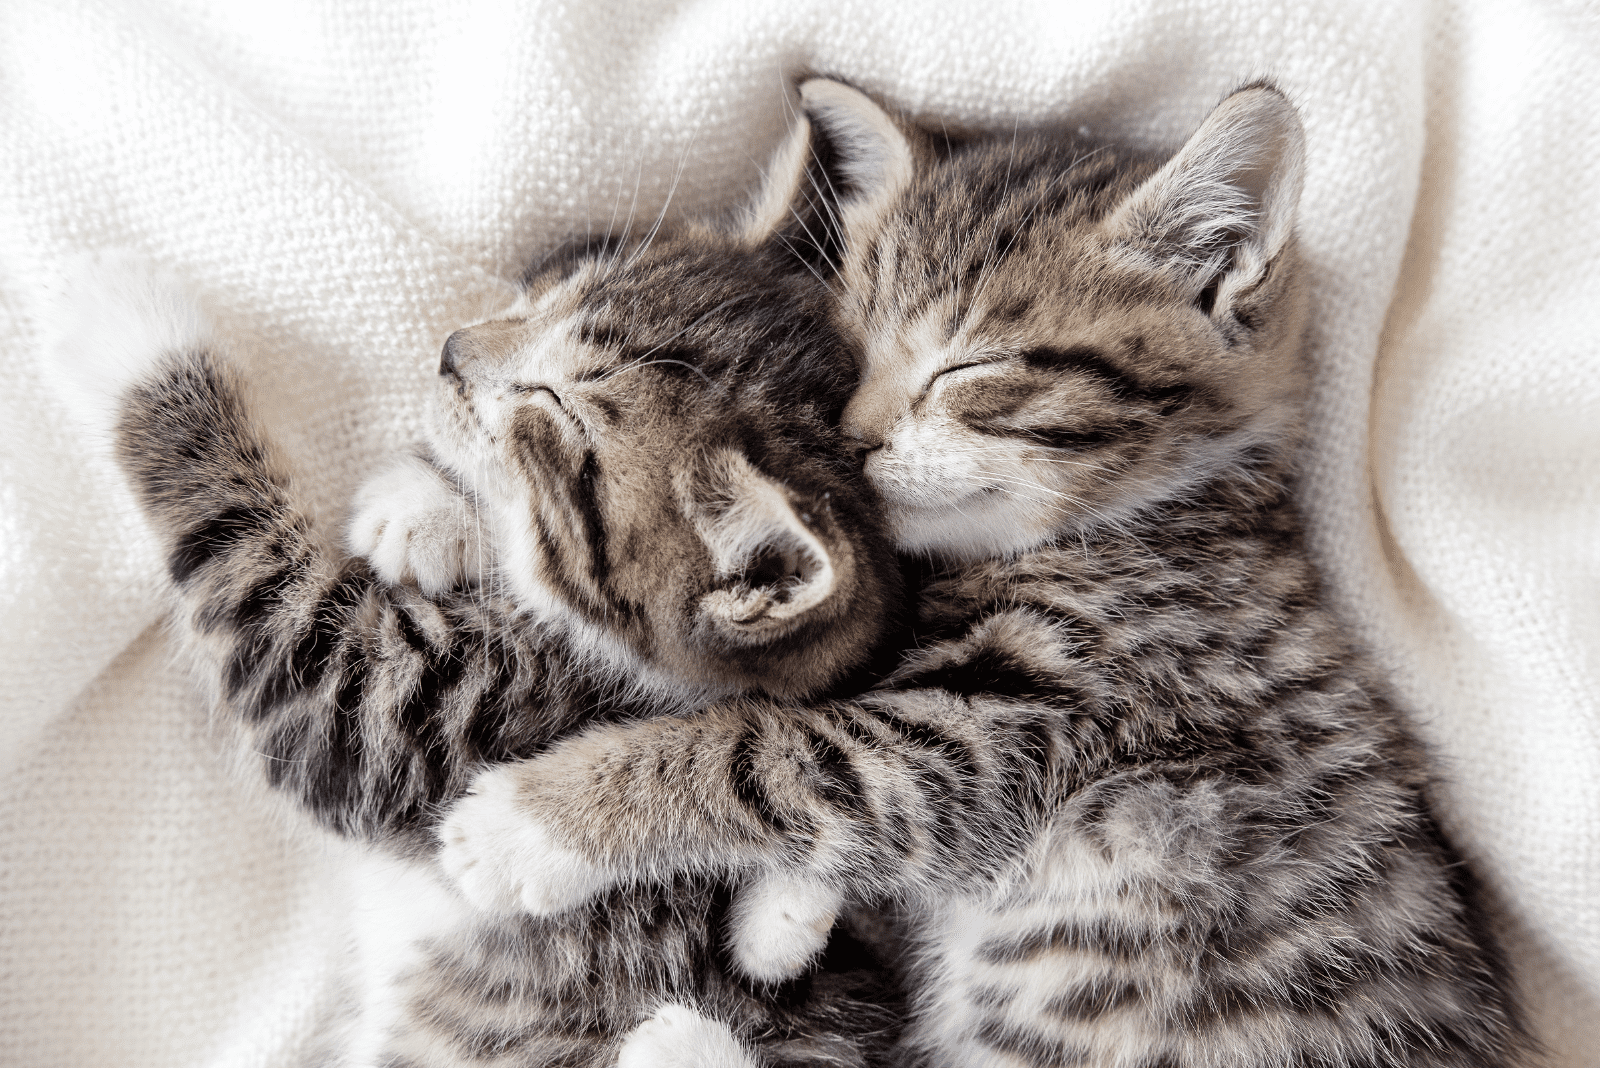 two adorable kittens are sleeping